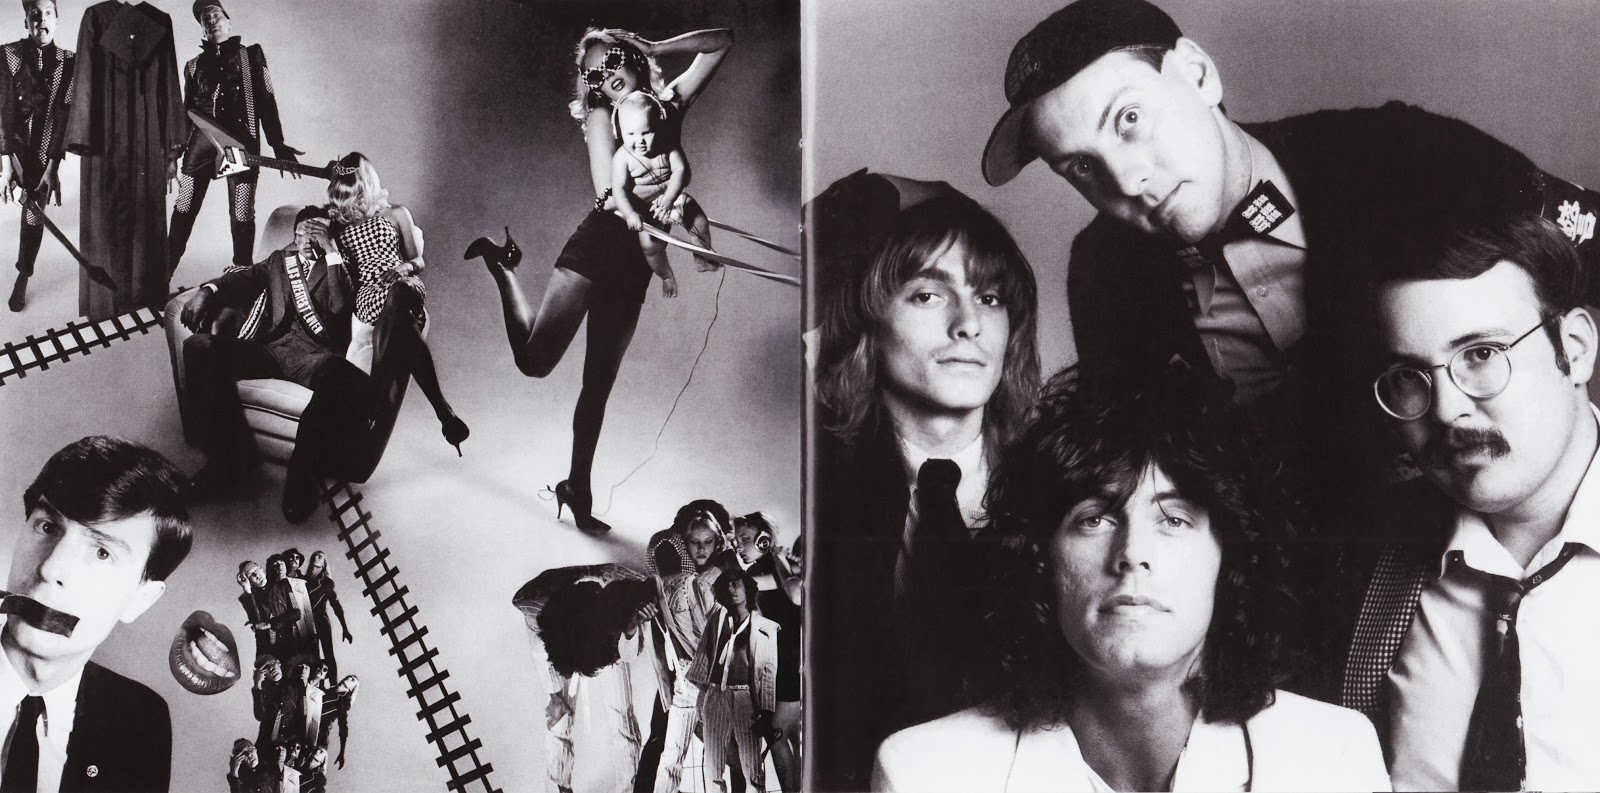 All shook up. Cheap Trick дискография. Cheap Trick all Shook up 1980. Cheap Trick 1977. Shake групп.